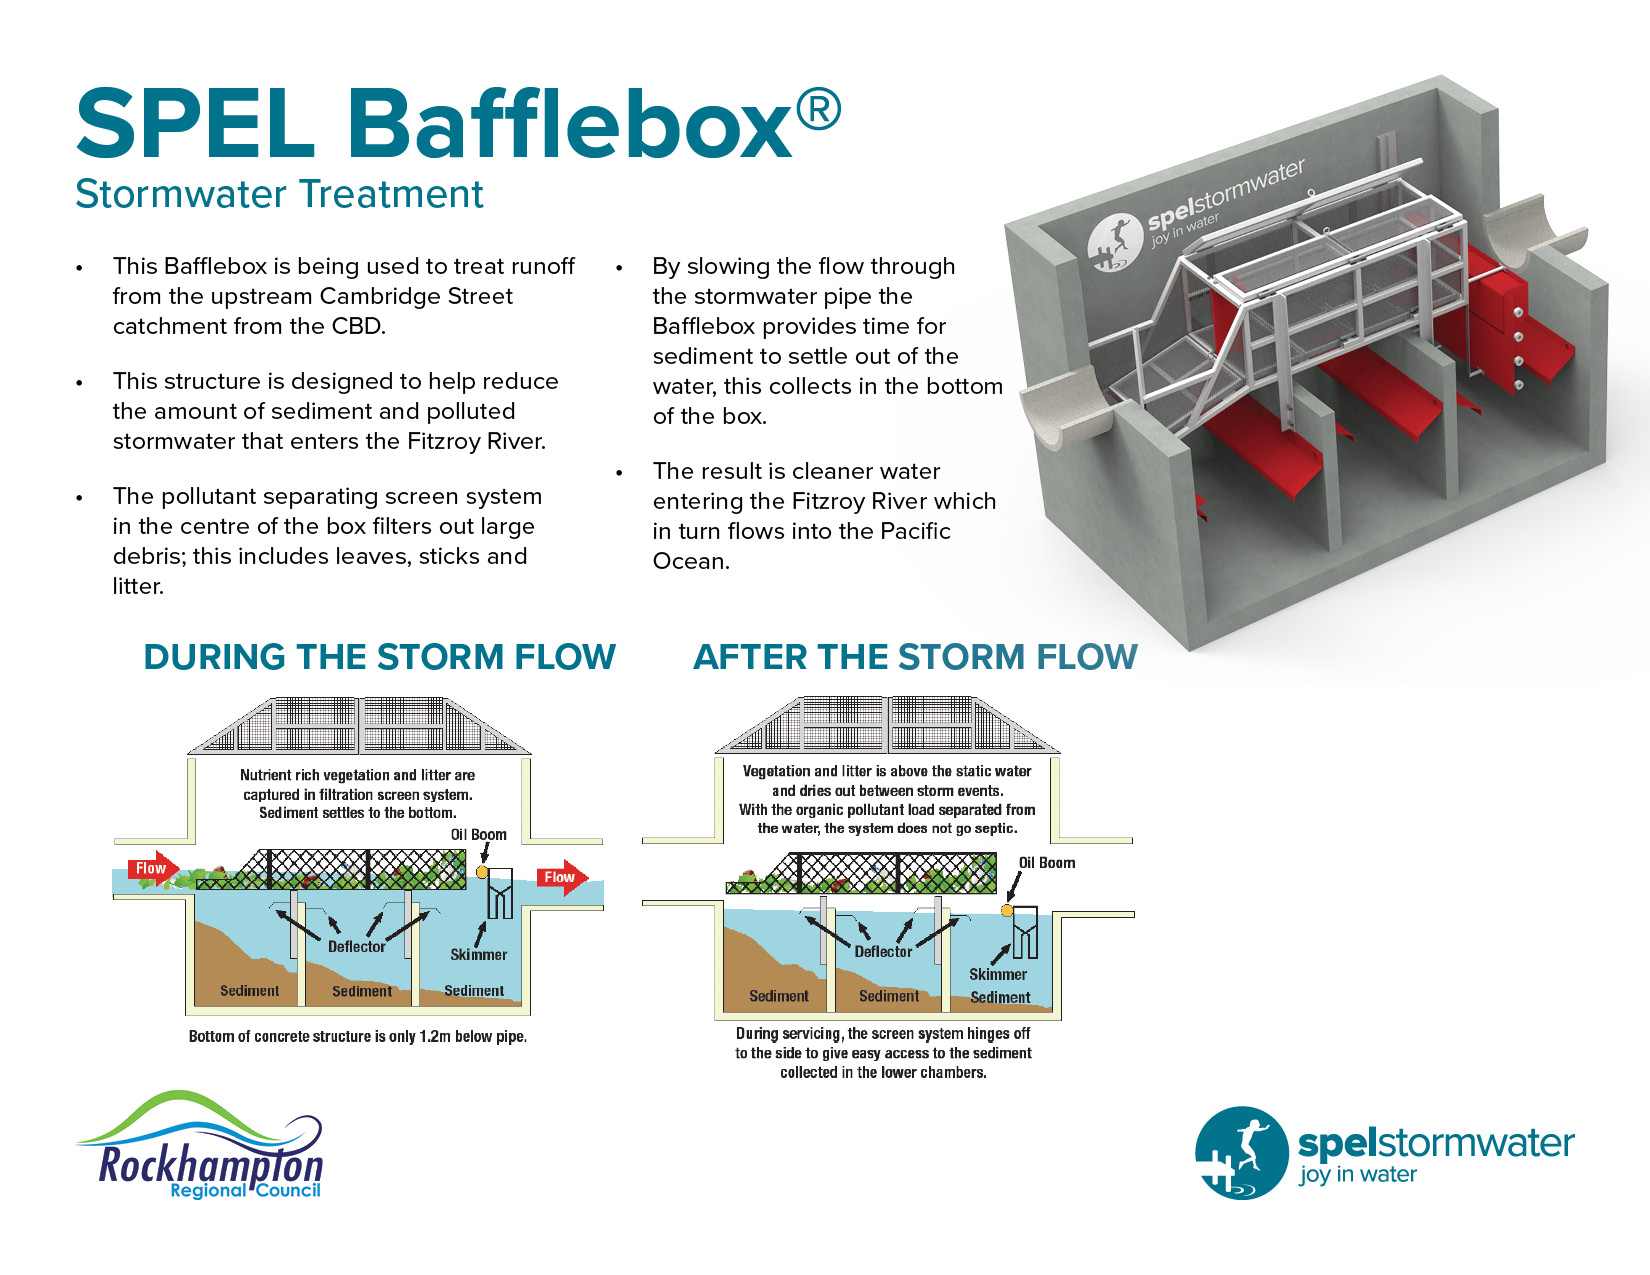 How the Baffle Box works